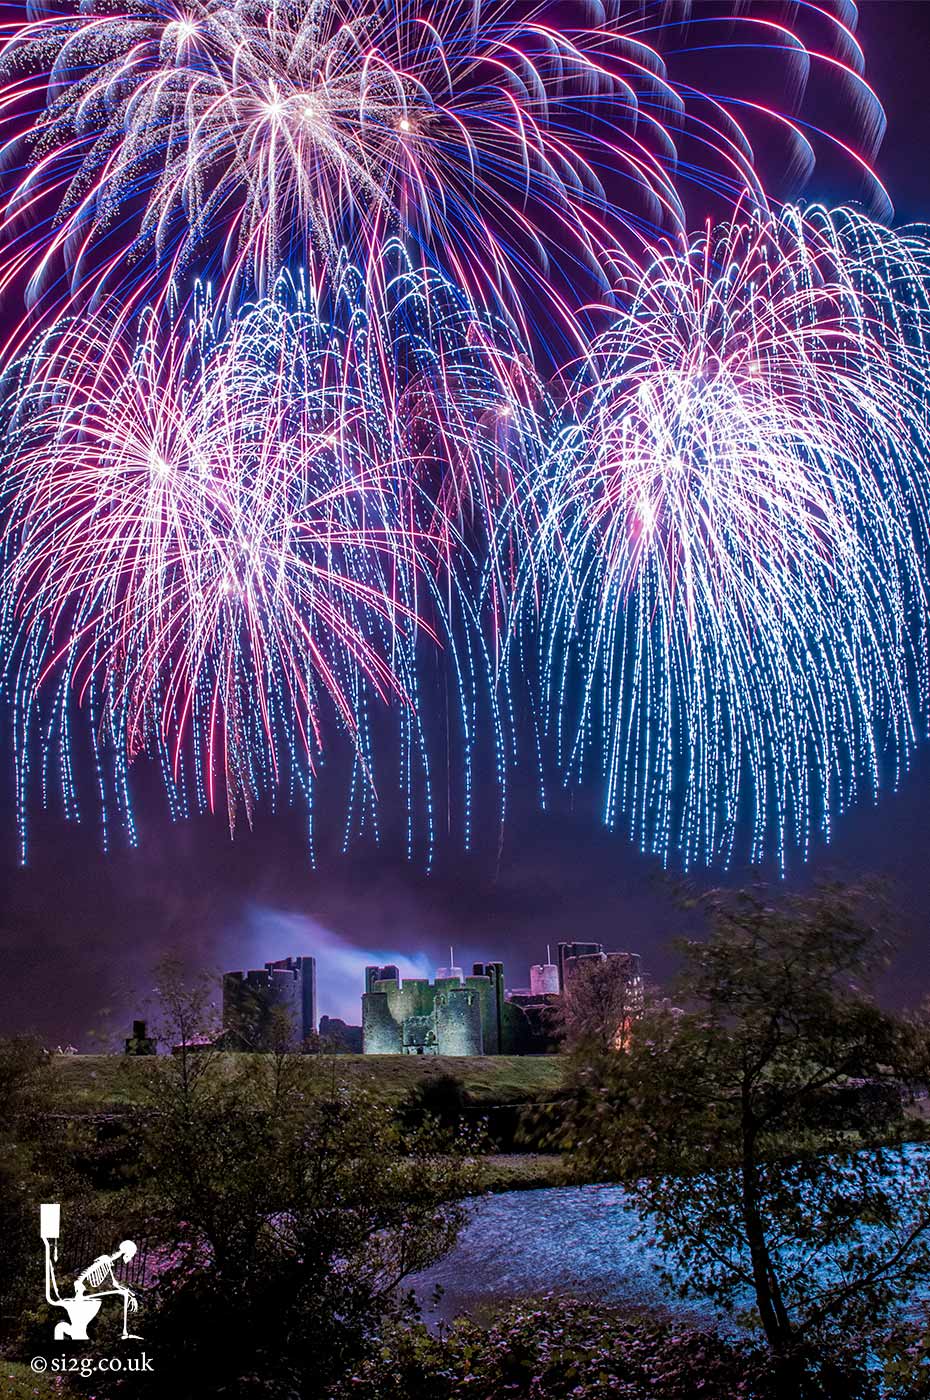 Caerphilly Castle Fireworks Display - Tourism photos of South Wales